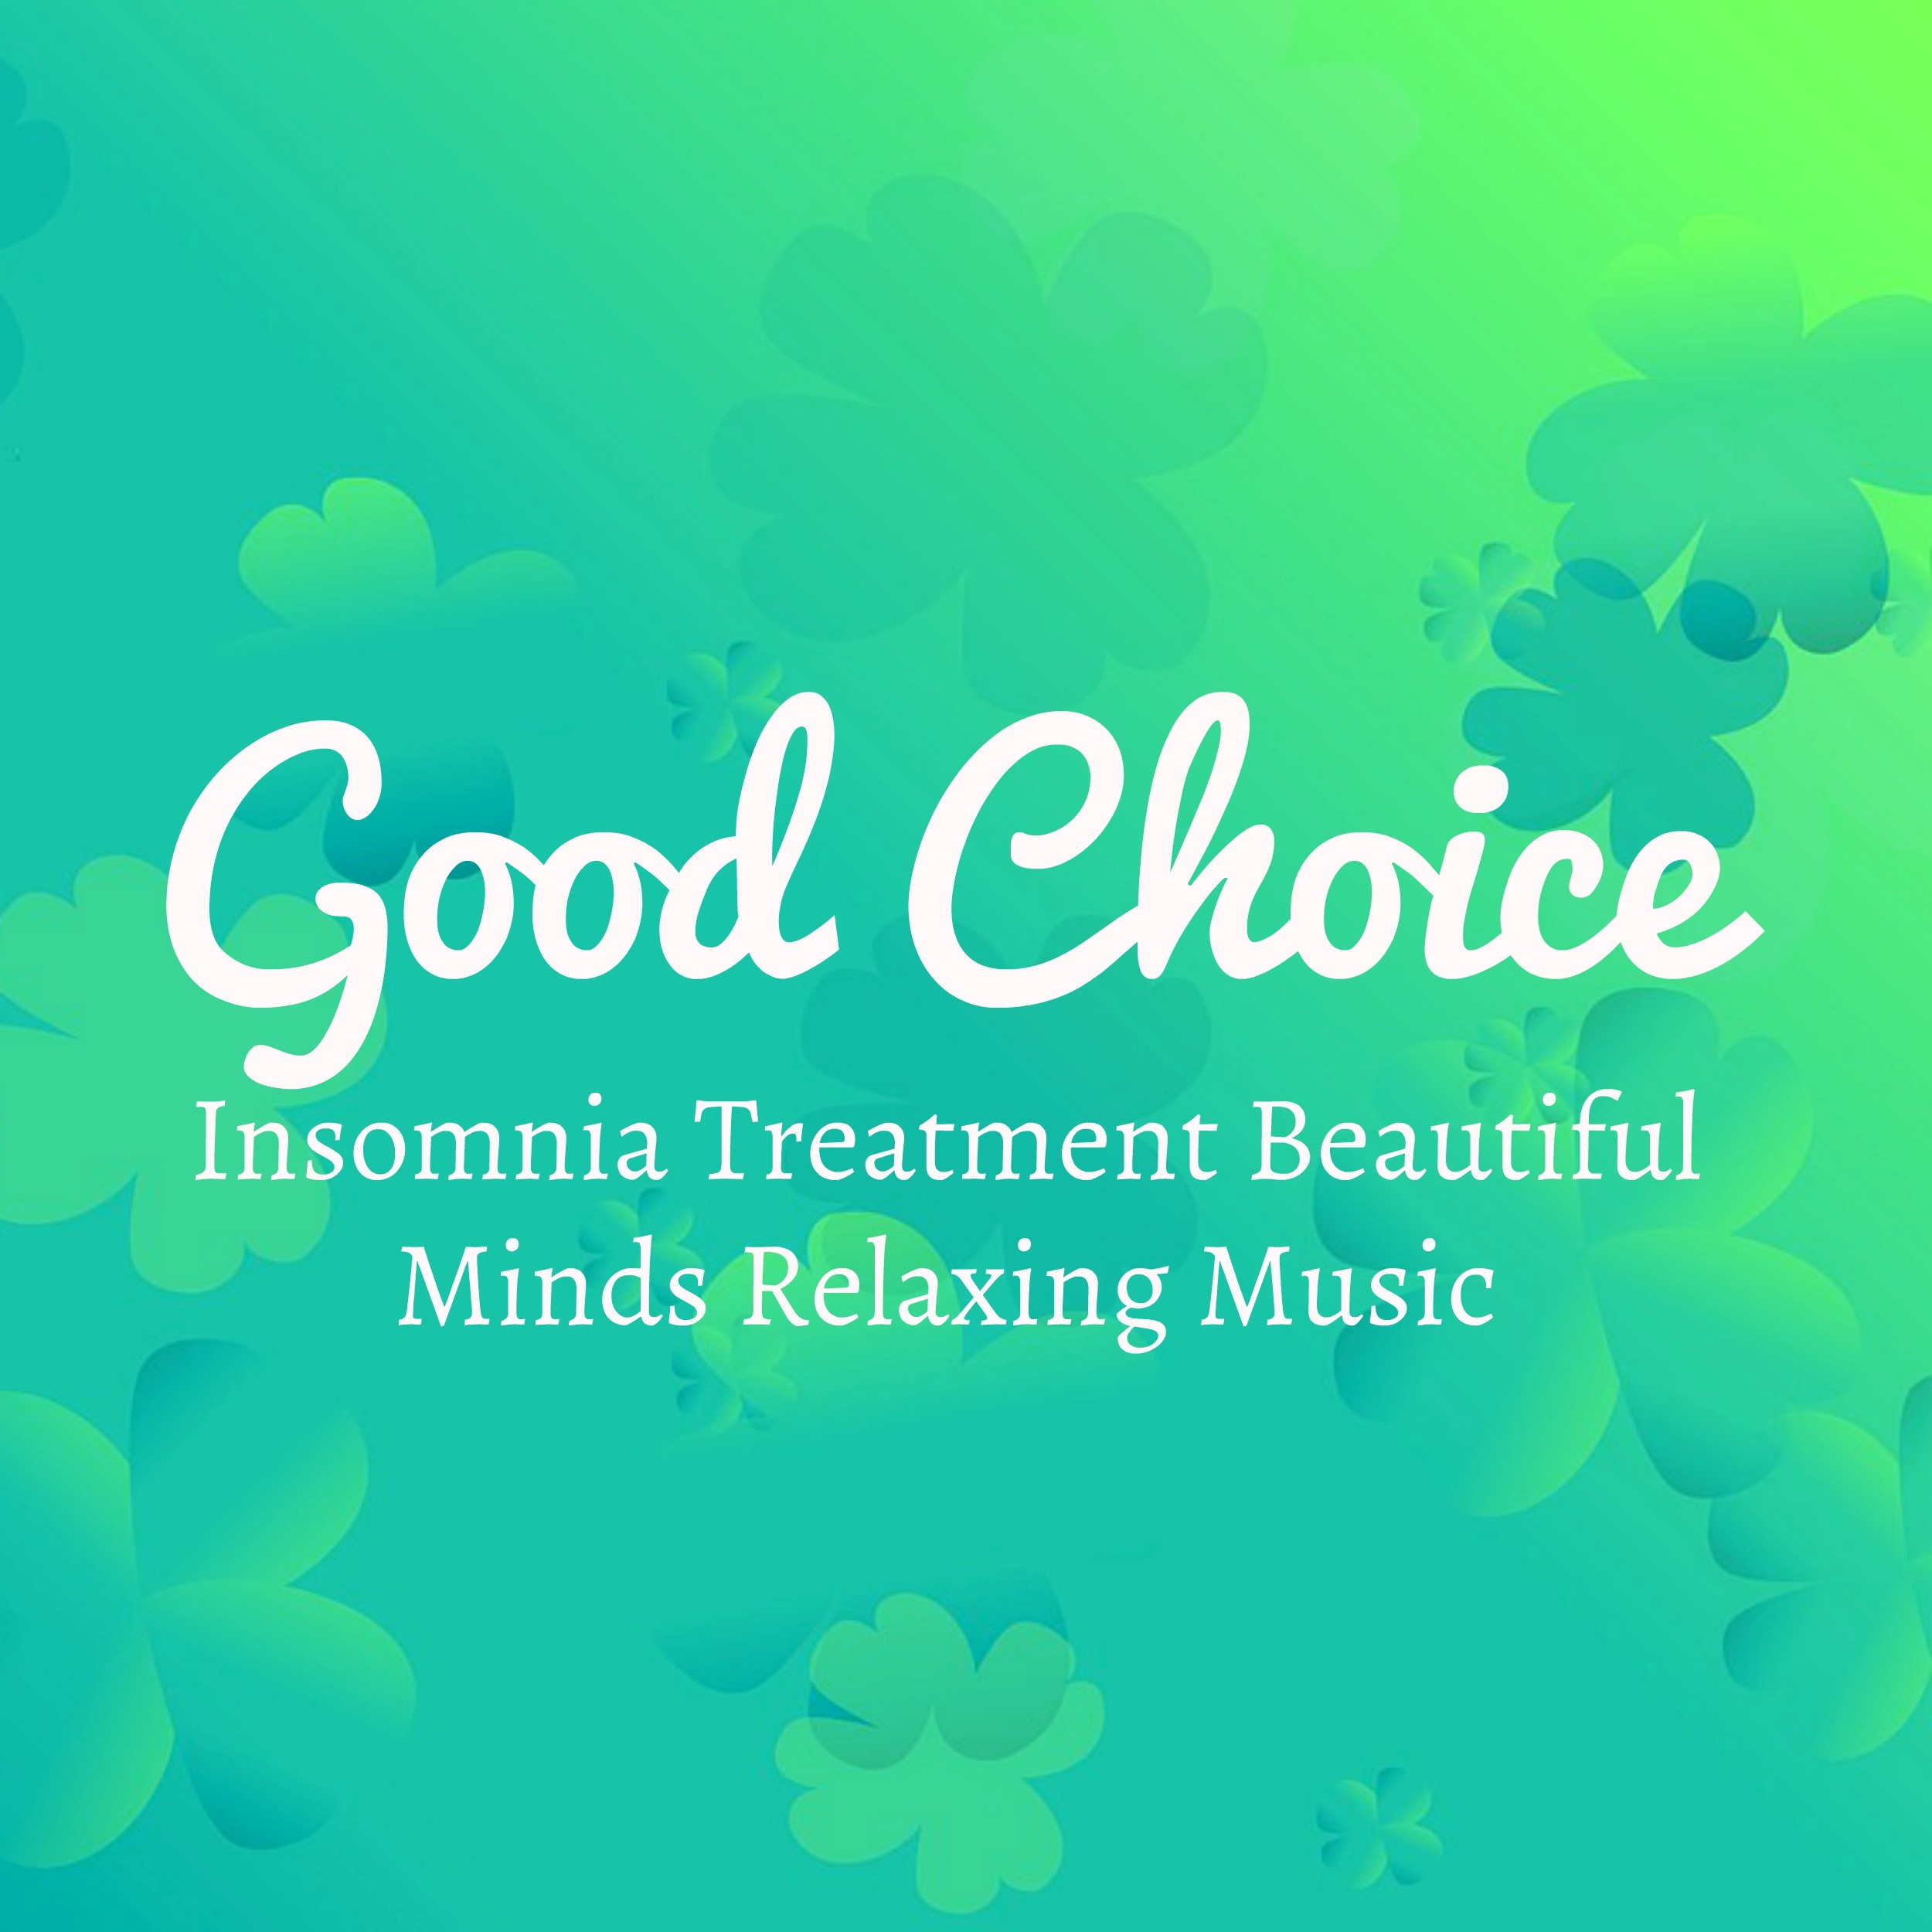 Good Choice - Insomnia Treatment Beautiful Minds Relaxing Music for Special Experience Yoga Chakras Healthy Lifestyle with Nature Instrumental Sounds